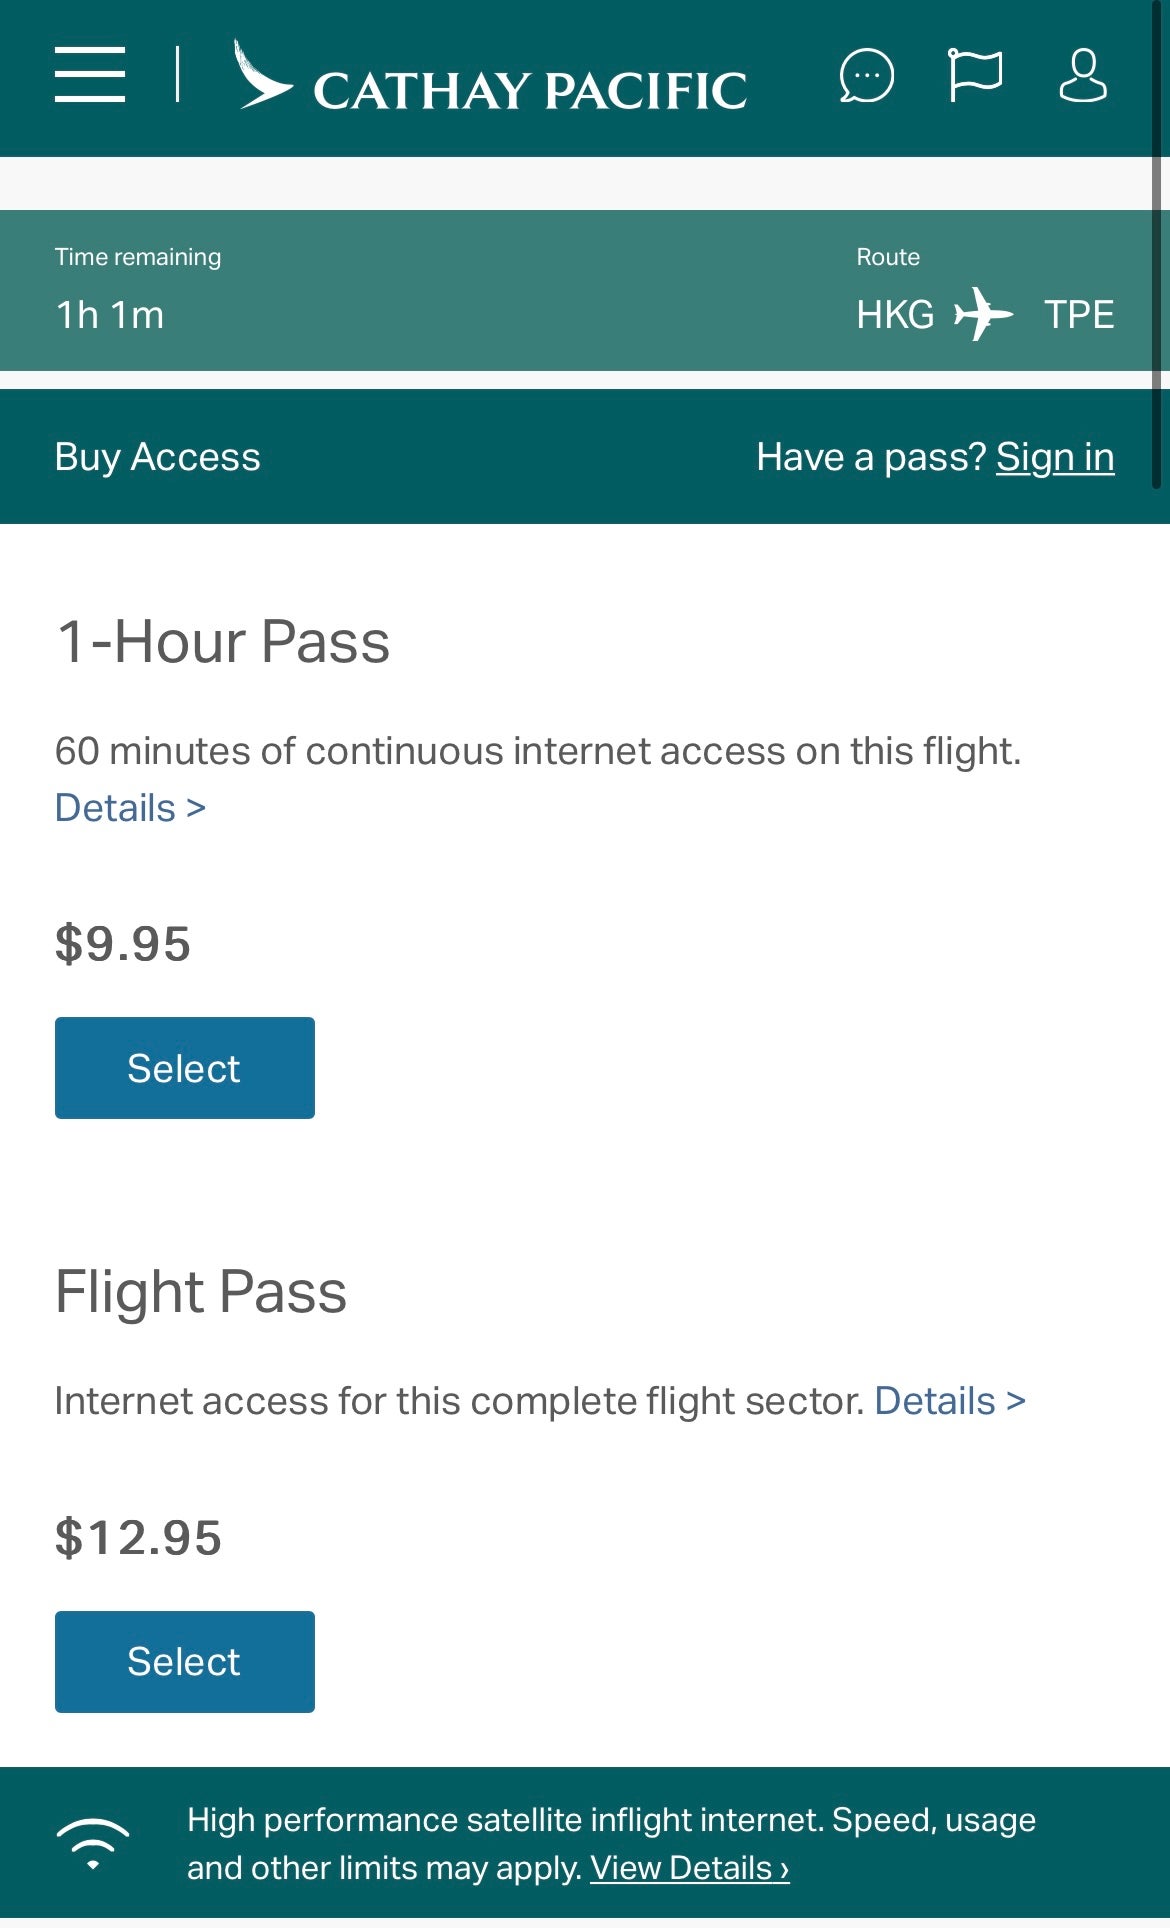 Cathay Pacific WiFi Prices